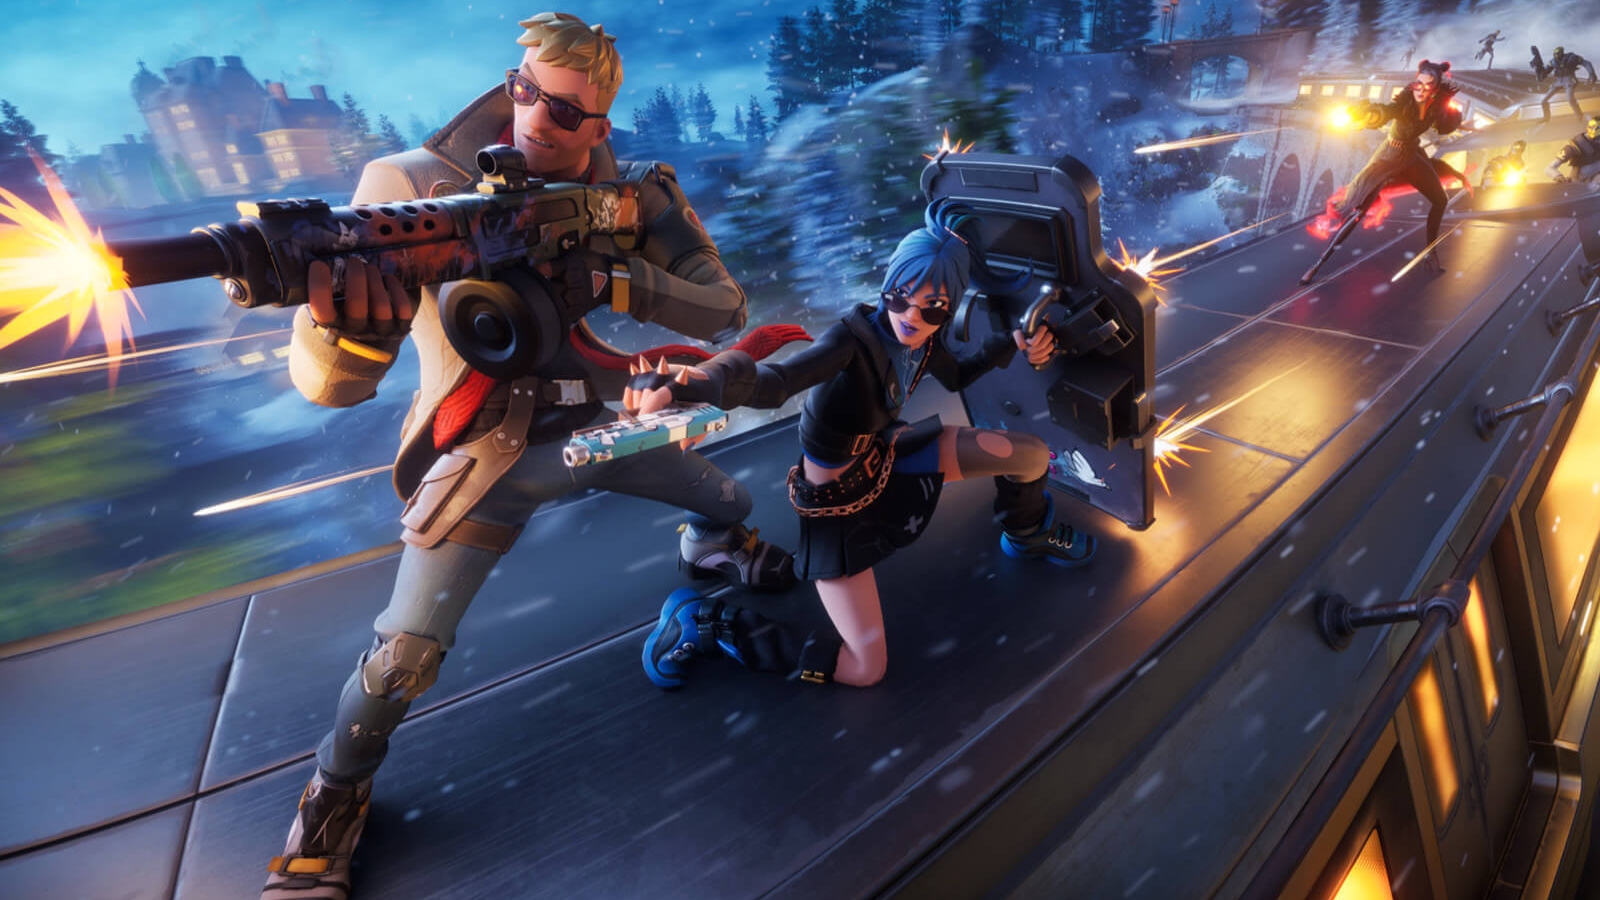 Epic Games Eventually Launches Fortnite Chapter 4 After Rough Ending